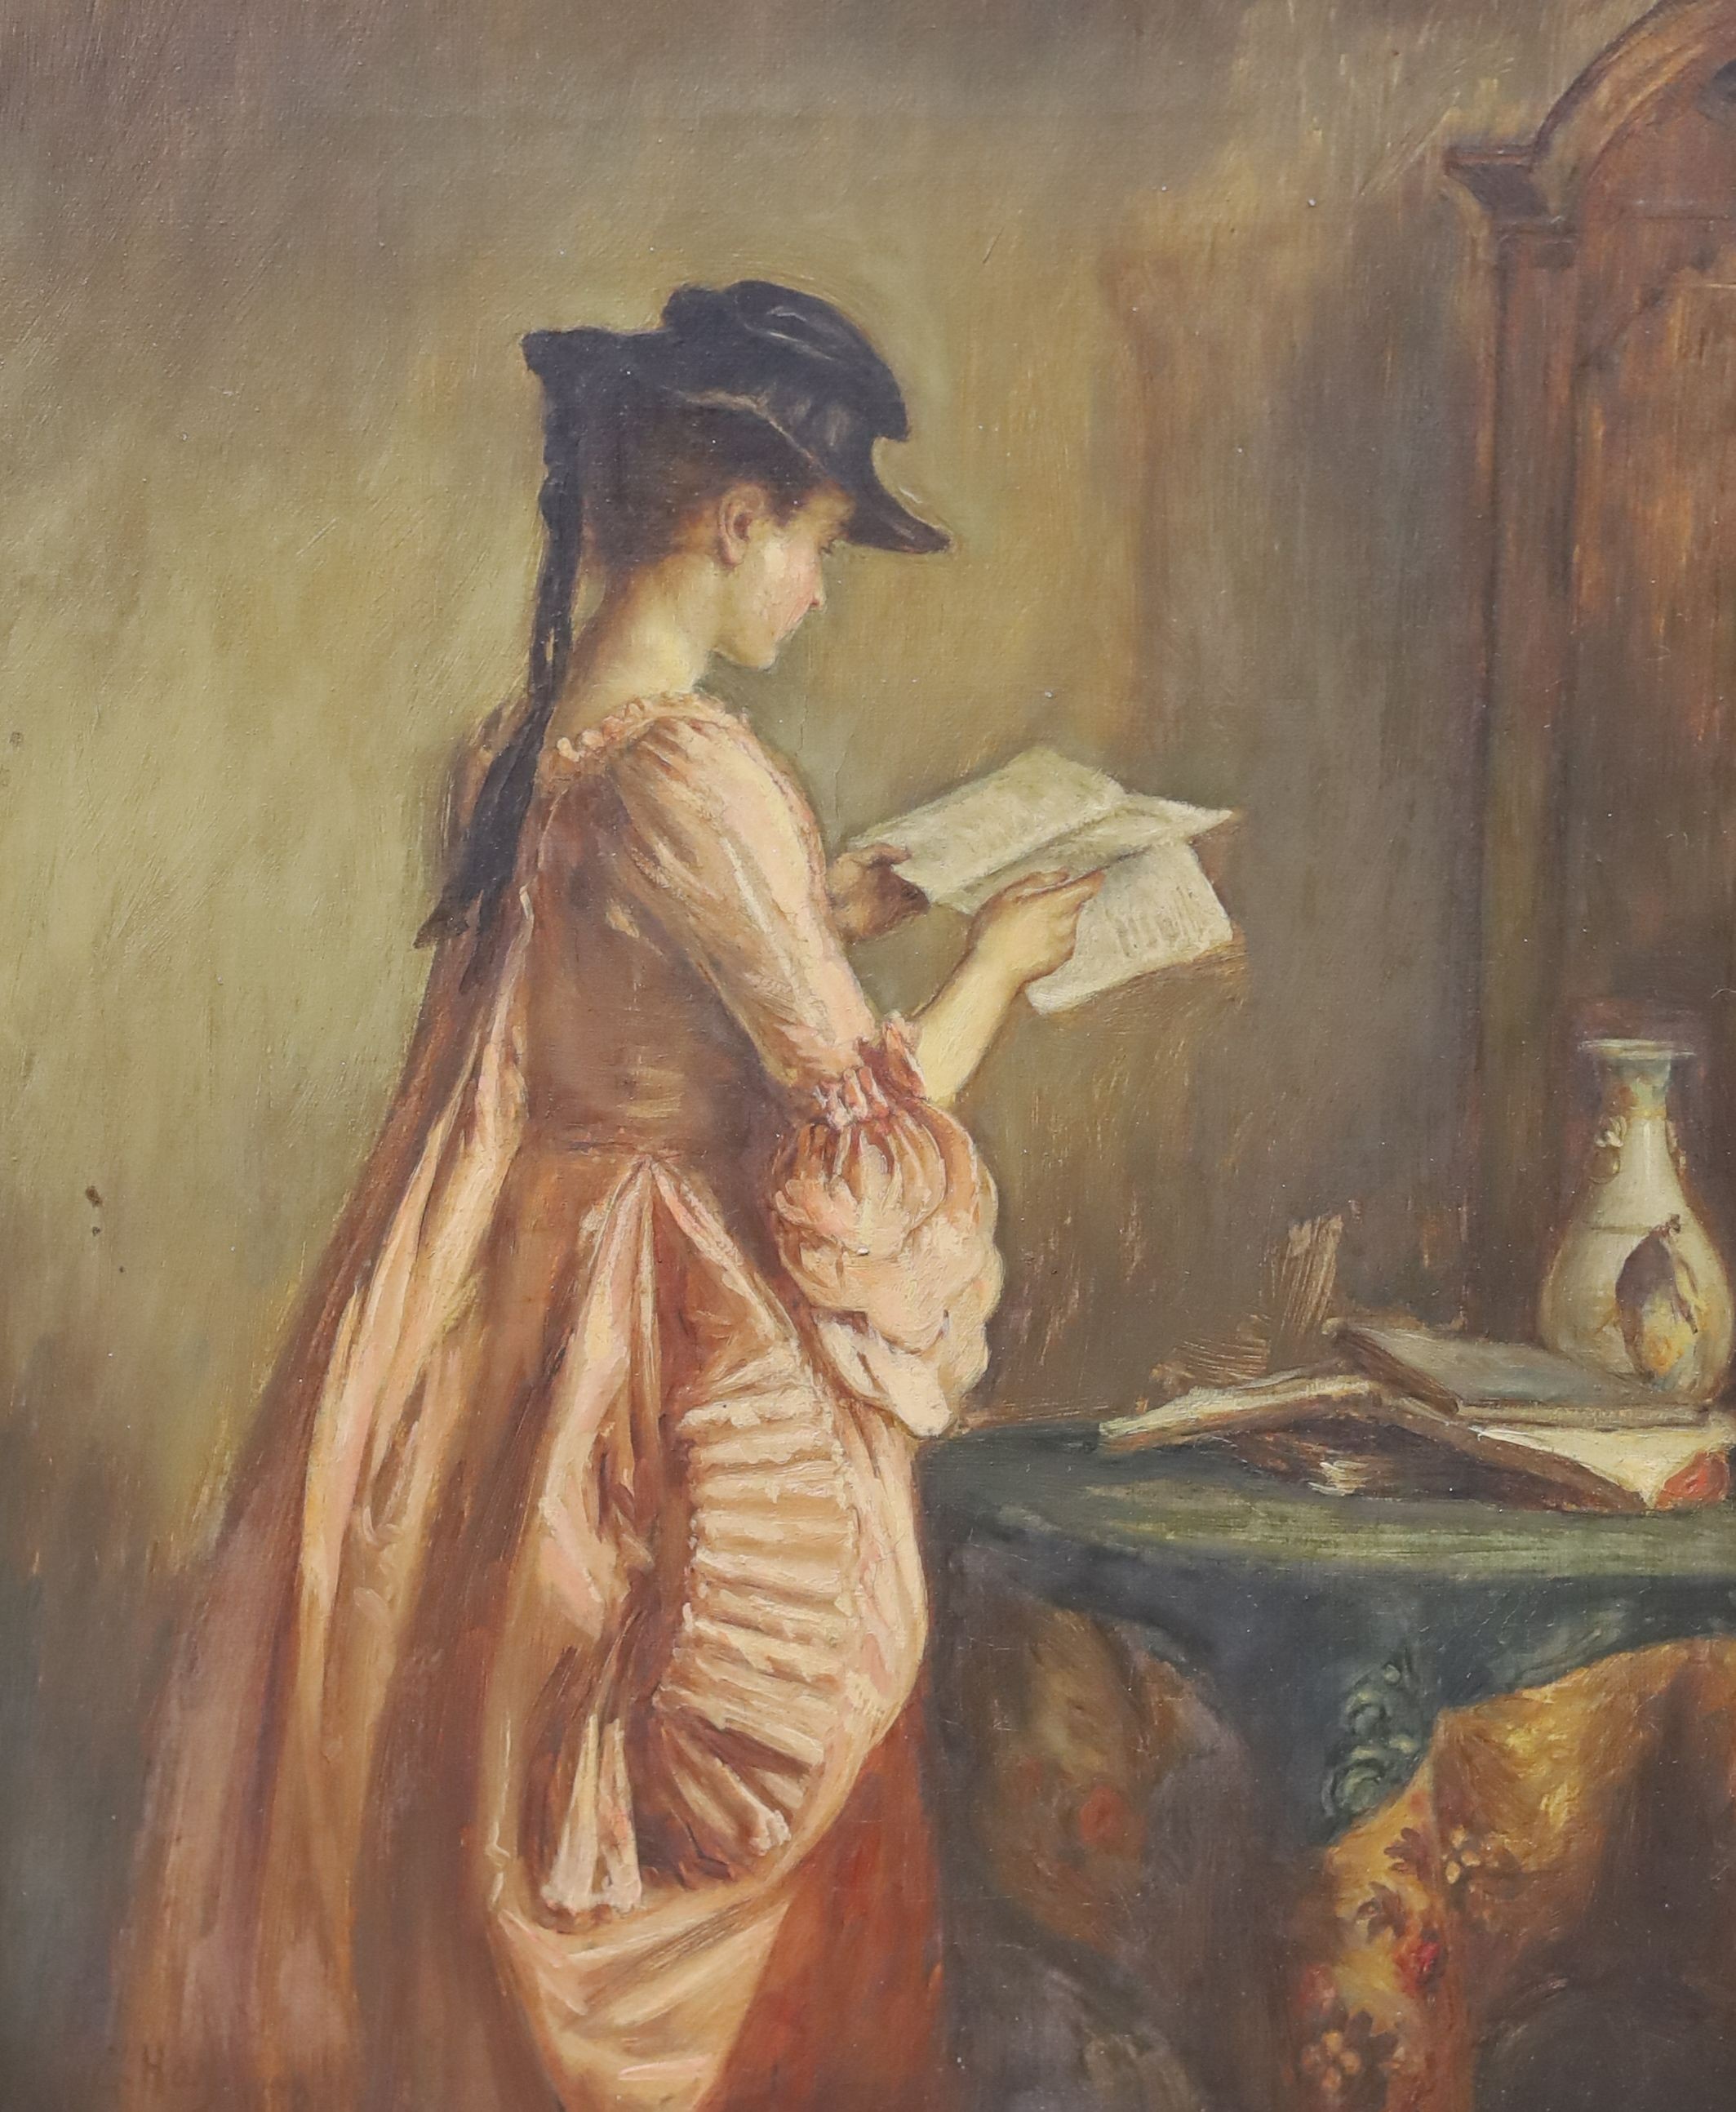 George Hay (1831-1913), oil on canvas, Interior with young lady reading a book, signed and dated 1880, 29 x 24cm